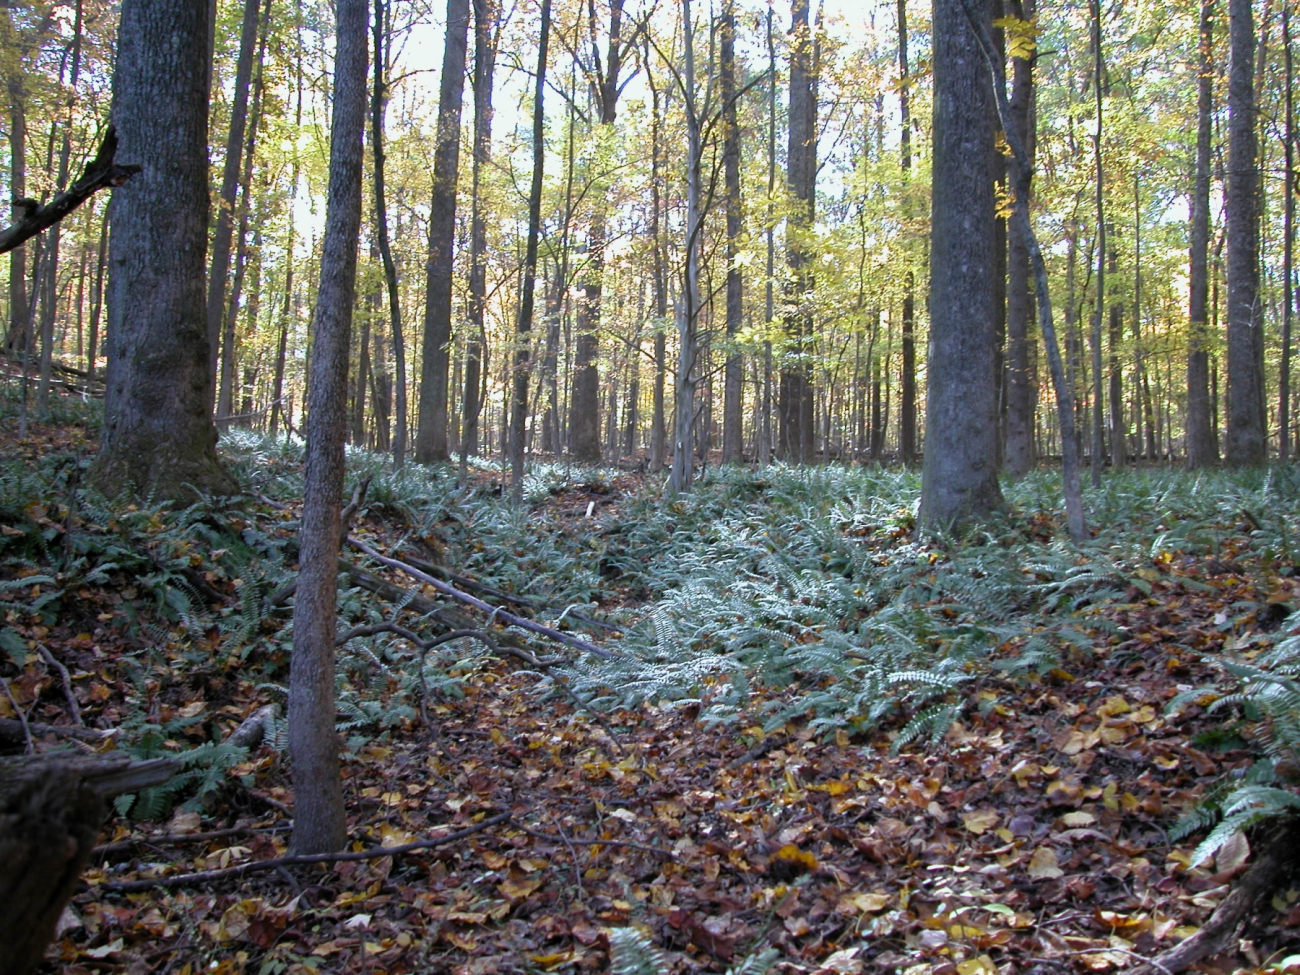 Ferns and fall leaves covering the forest floor